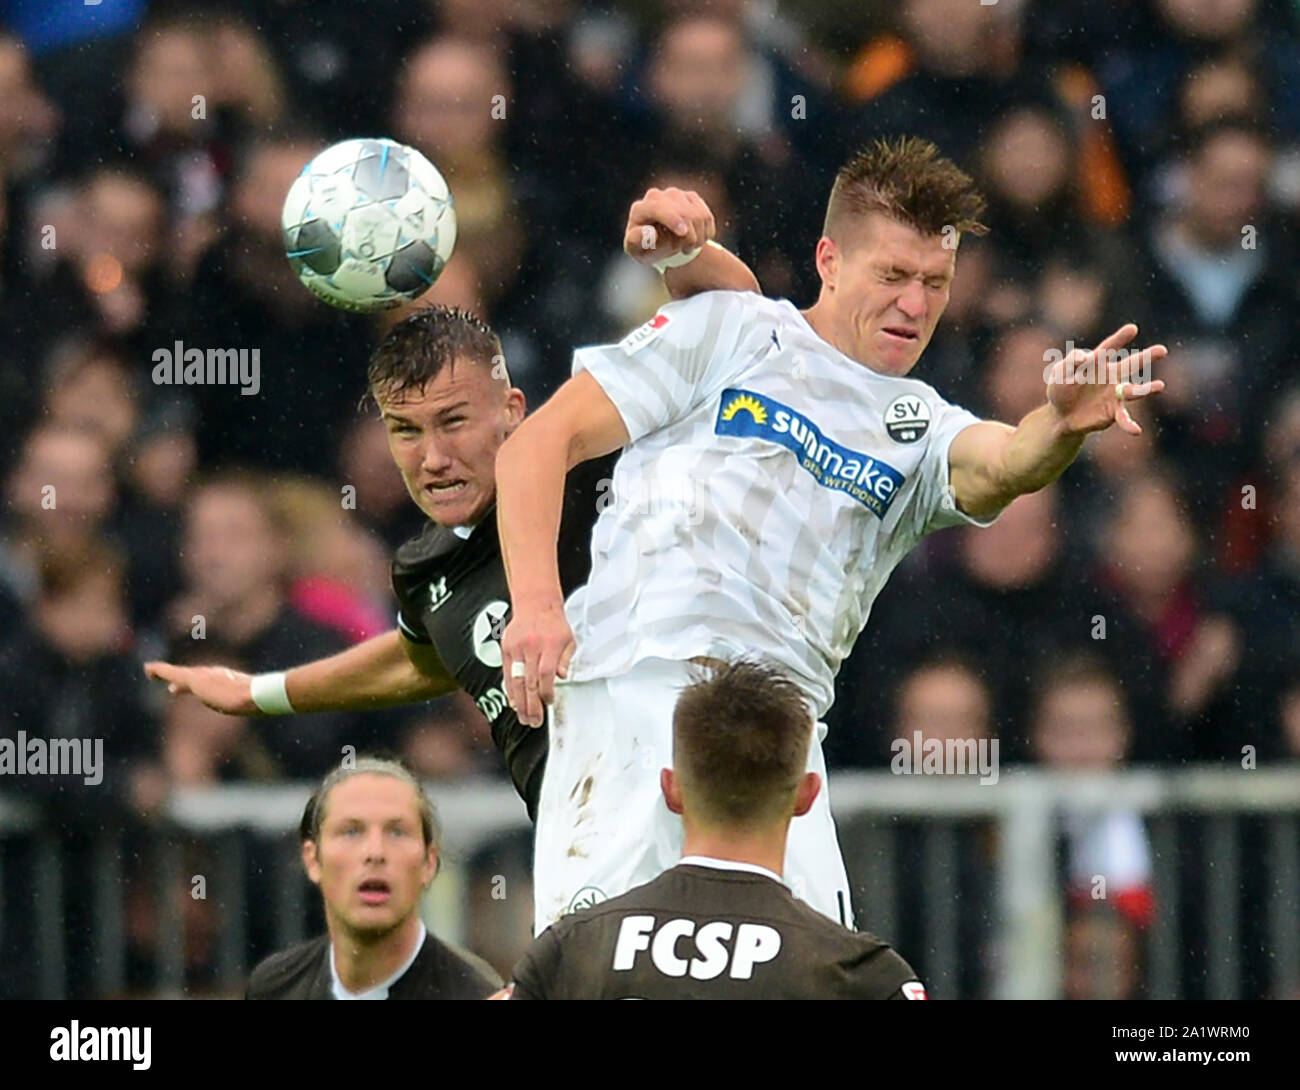 Hamburg, Germany. 29th Sep, 2019. Soccer: 2nd Bundesliga, 8th matchday: FC St. Pauli - SV Sandhausen at Millerntor Stadium. Hamburg's Leo Östigard (l) and Sandhausens Kevin Behrens fight for the ball. Credit: Daniel Bockwoldt/dpa - IMPORTANT NOTE: In accordance with the requirements of the DFL Deutsche Fußball Liga or the DFB Deutscher Fußball-Bund, it is prohibited to use or have used photographs taken in the stadium and/or the match in the form of sequence images and/or video-like photo sequences./dpa/Alamy Live News Stock Photo